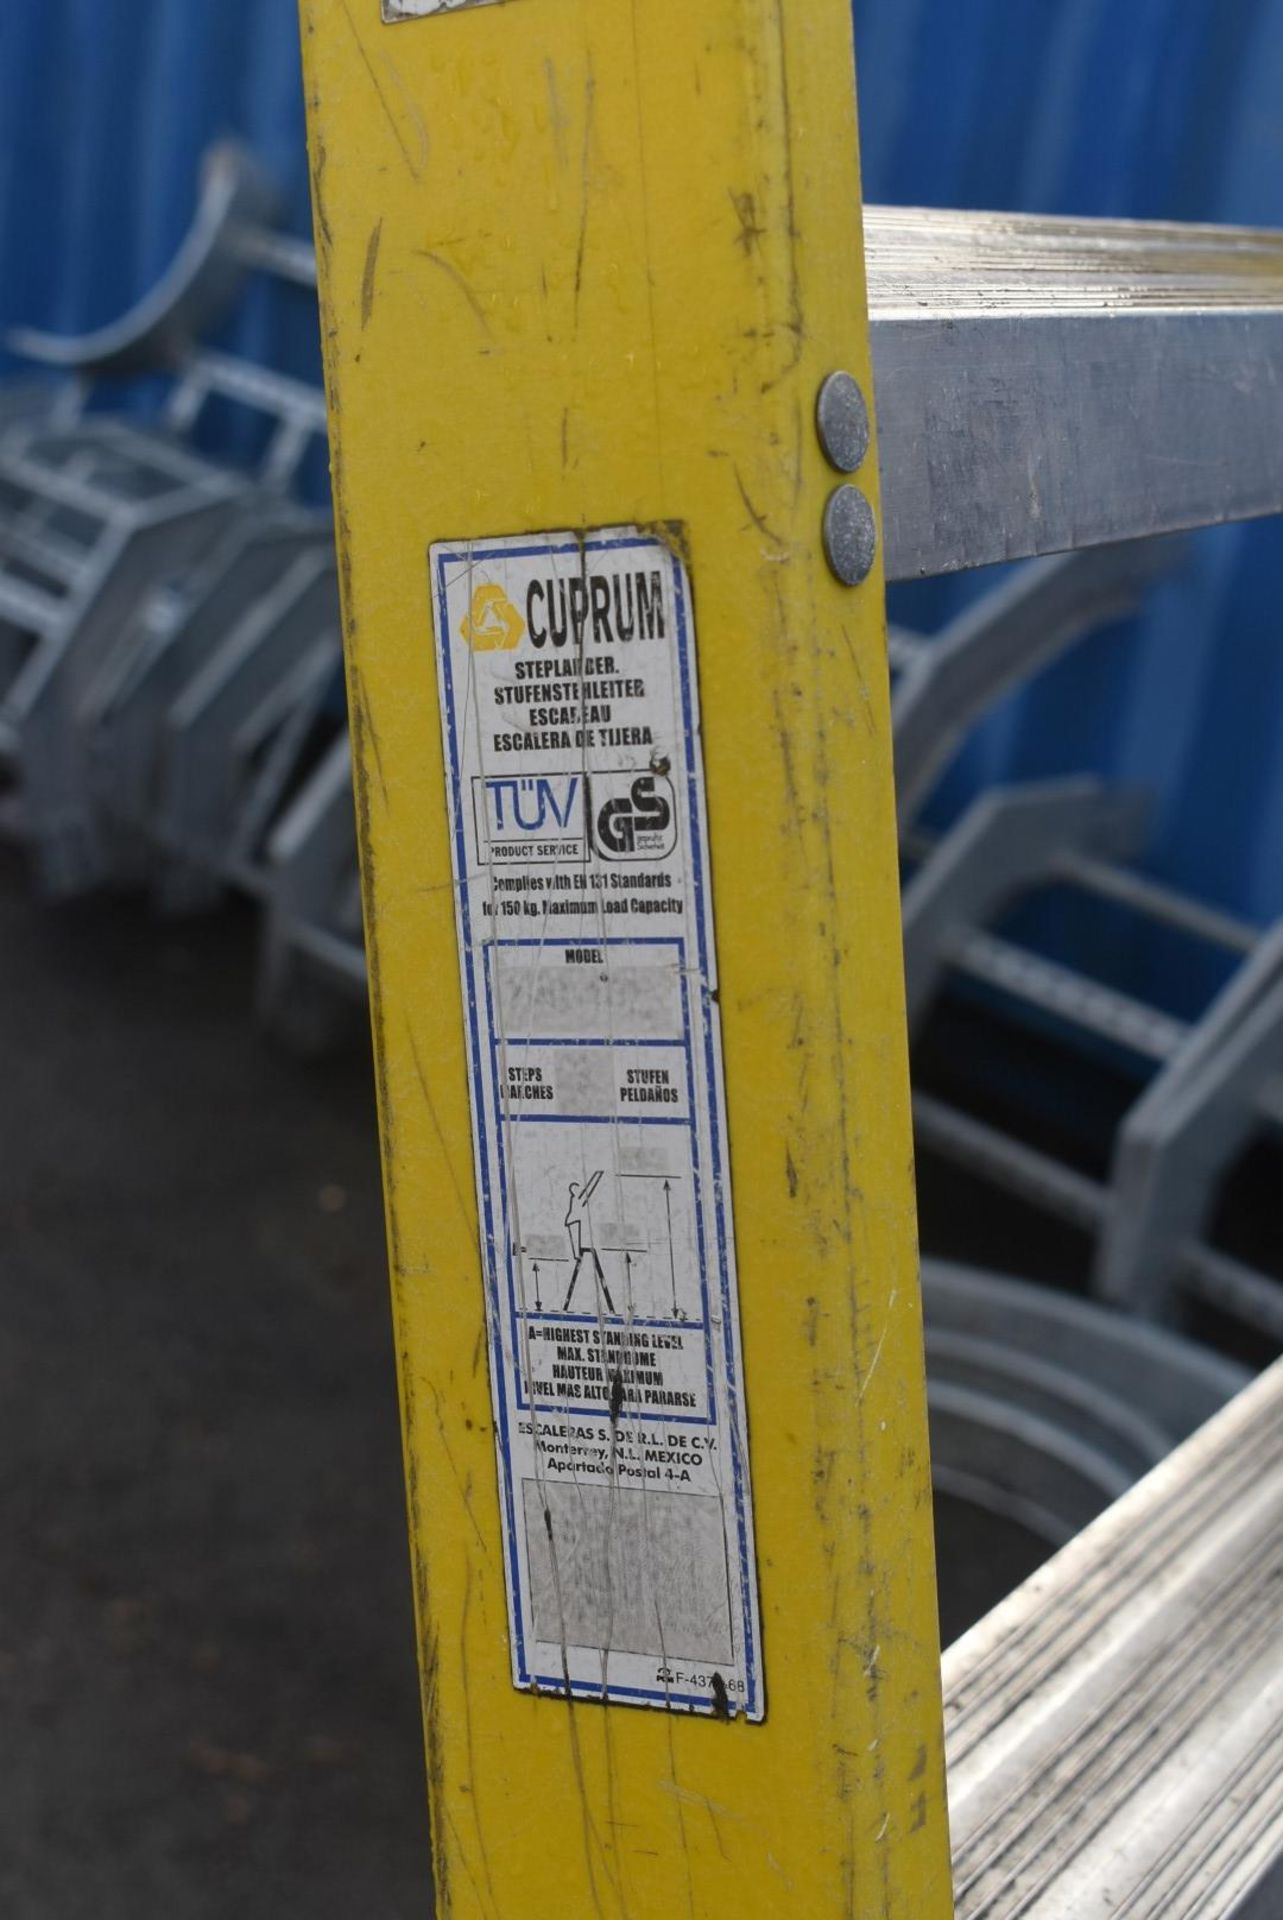 1 x Fibreglass Site Ladder With 9 Treads - Suitable For Working Around Thermal or Electrical Dangers - Image 5 of 9